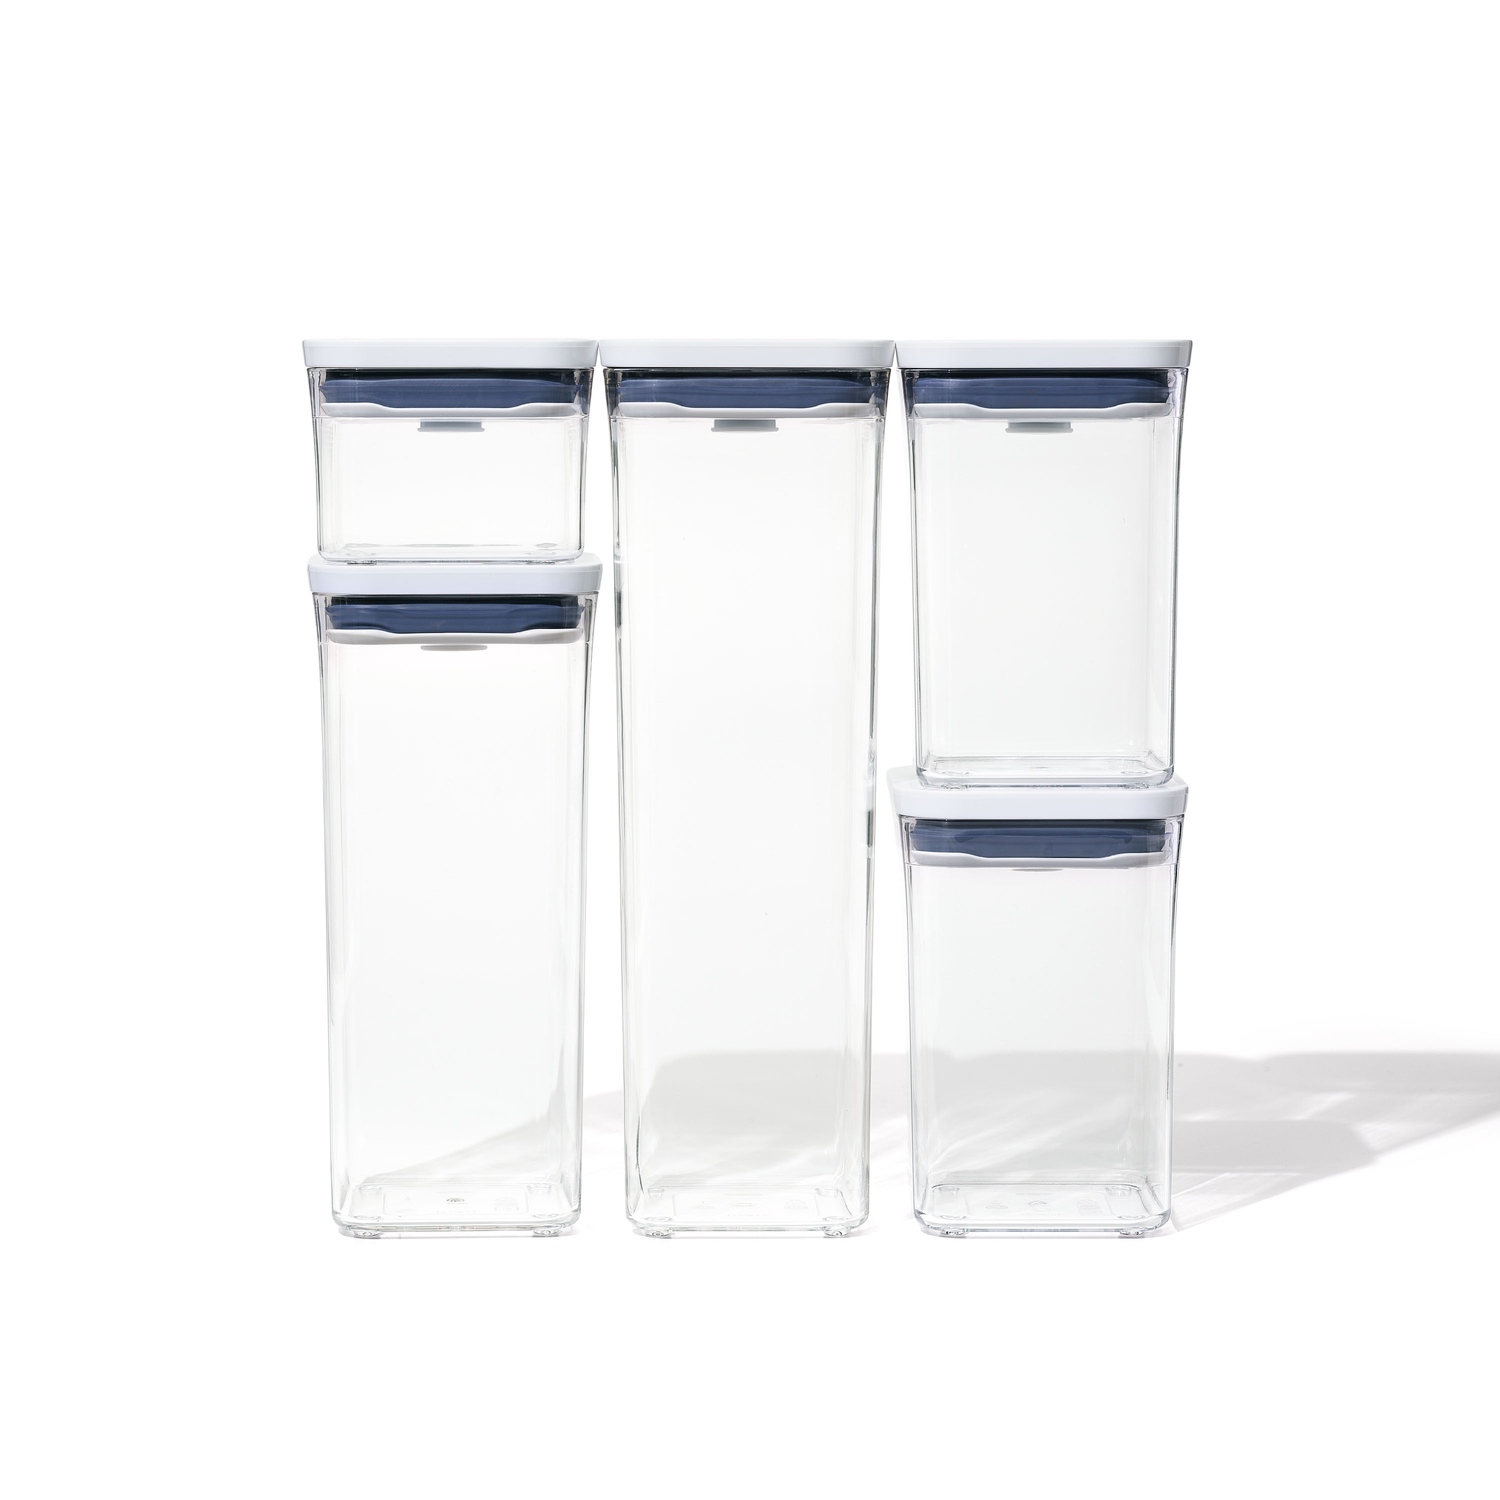 Photos - Other Accessories Oxo Good Grips Clear Pop Container Set 5 pk 11235900 